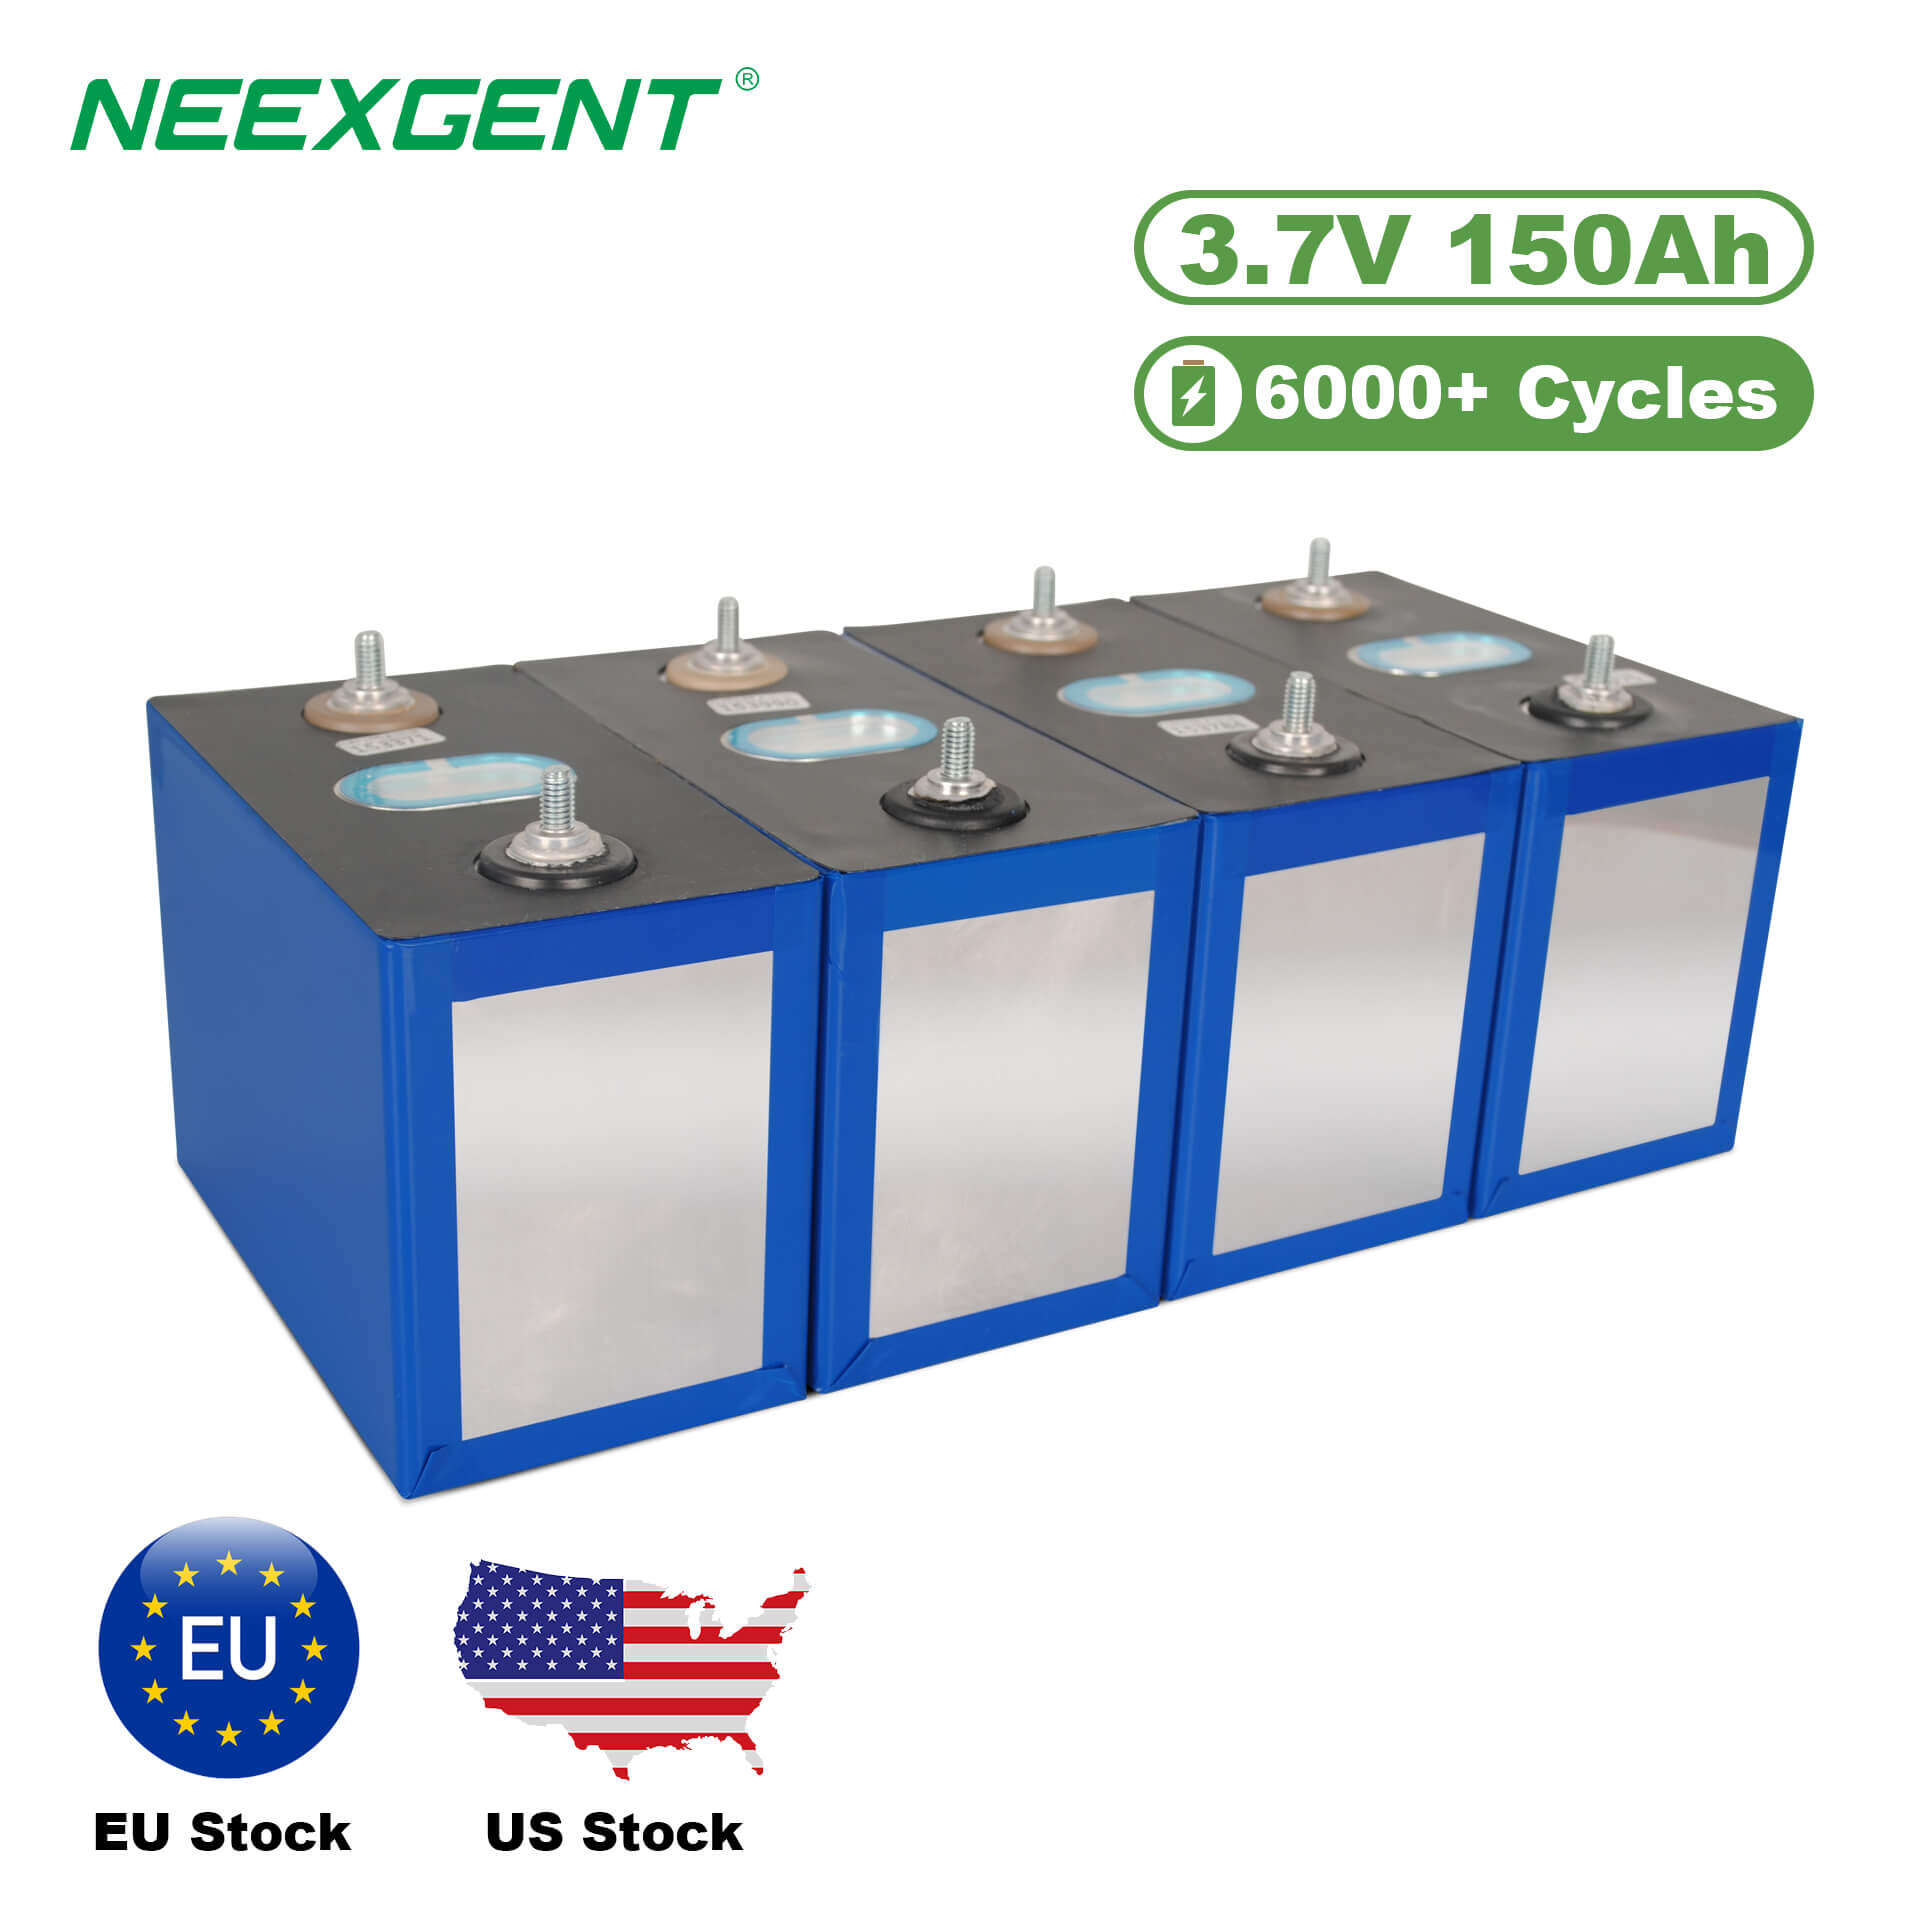 Neexgent Lifepo4 Battery Cell 3.7v 150ah Prismatic Lithium Ion Batteries